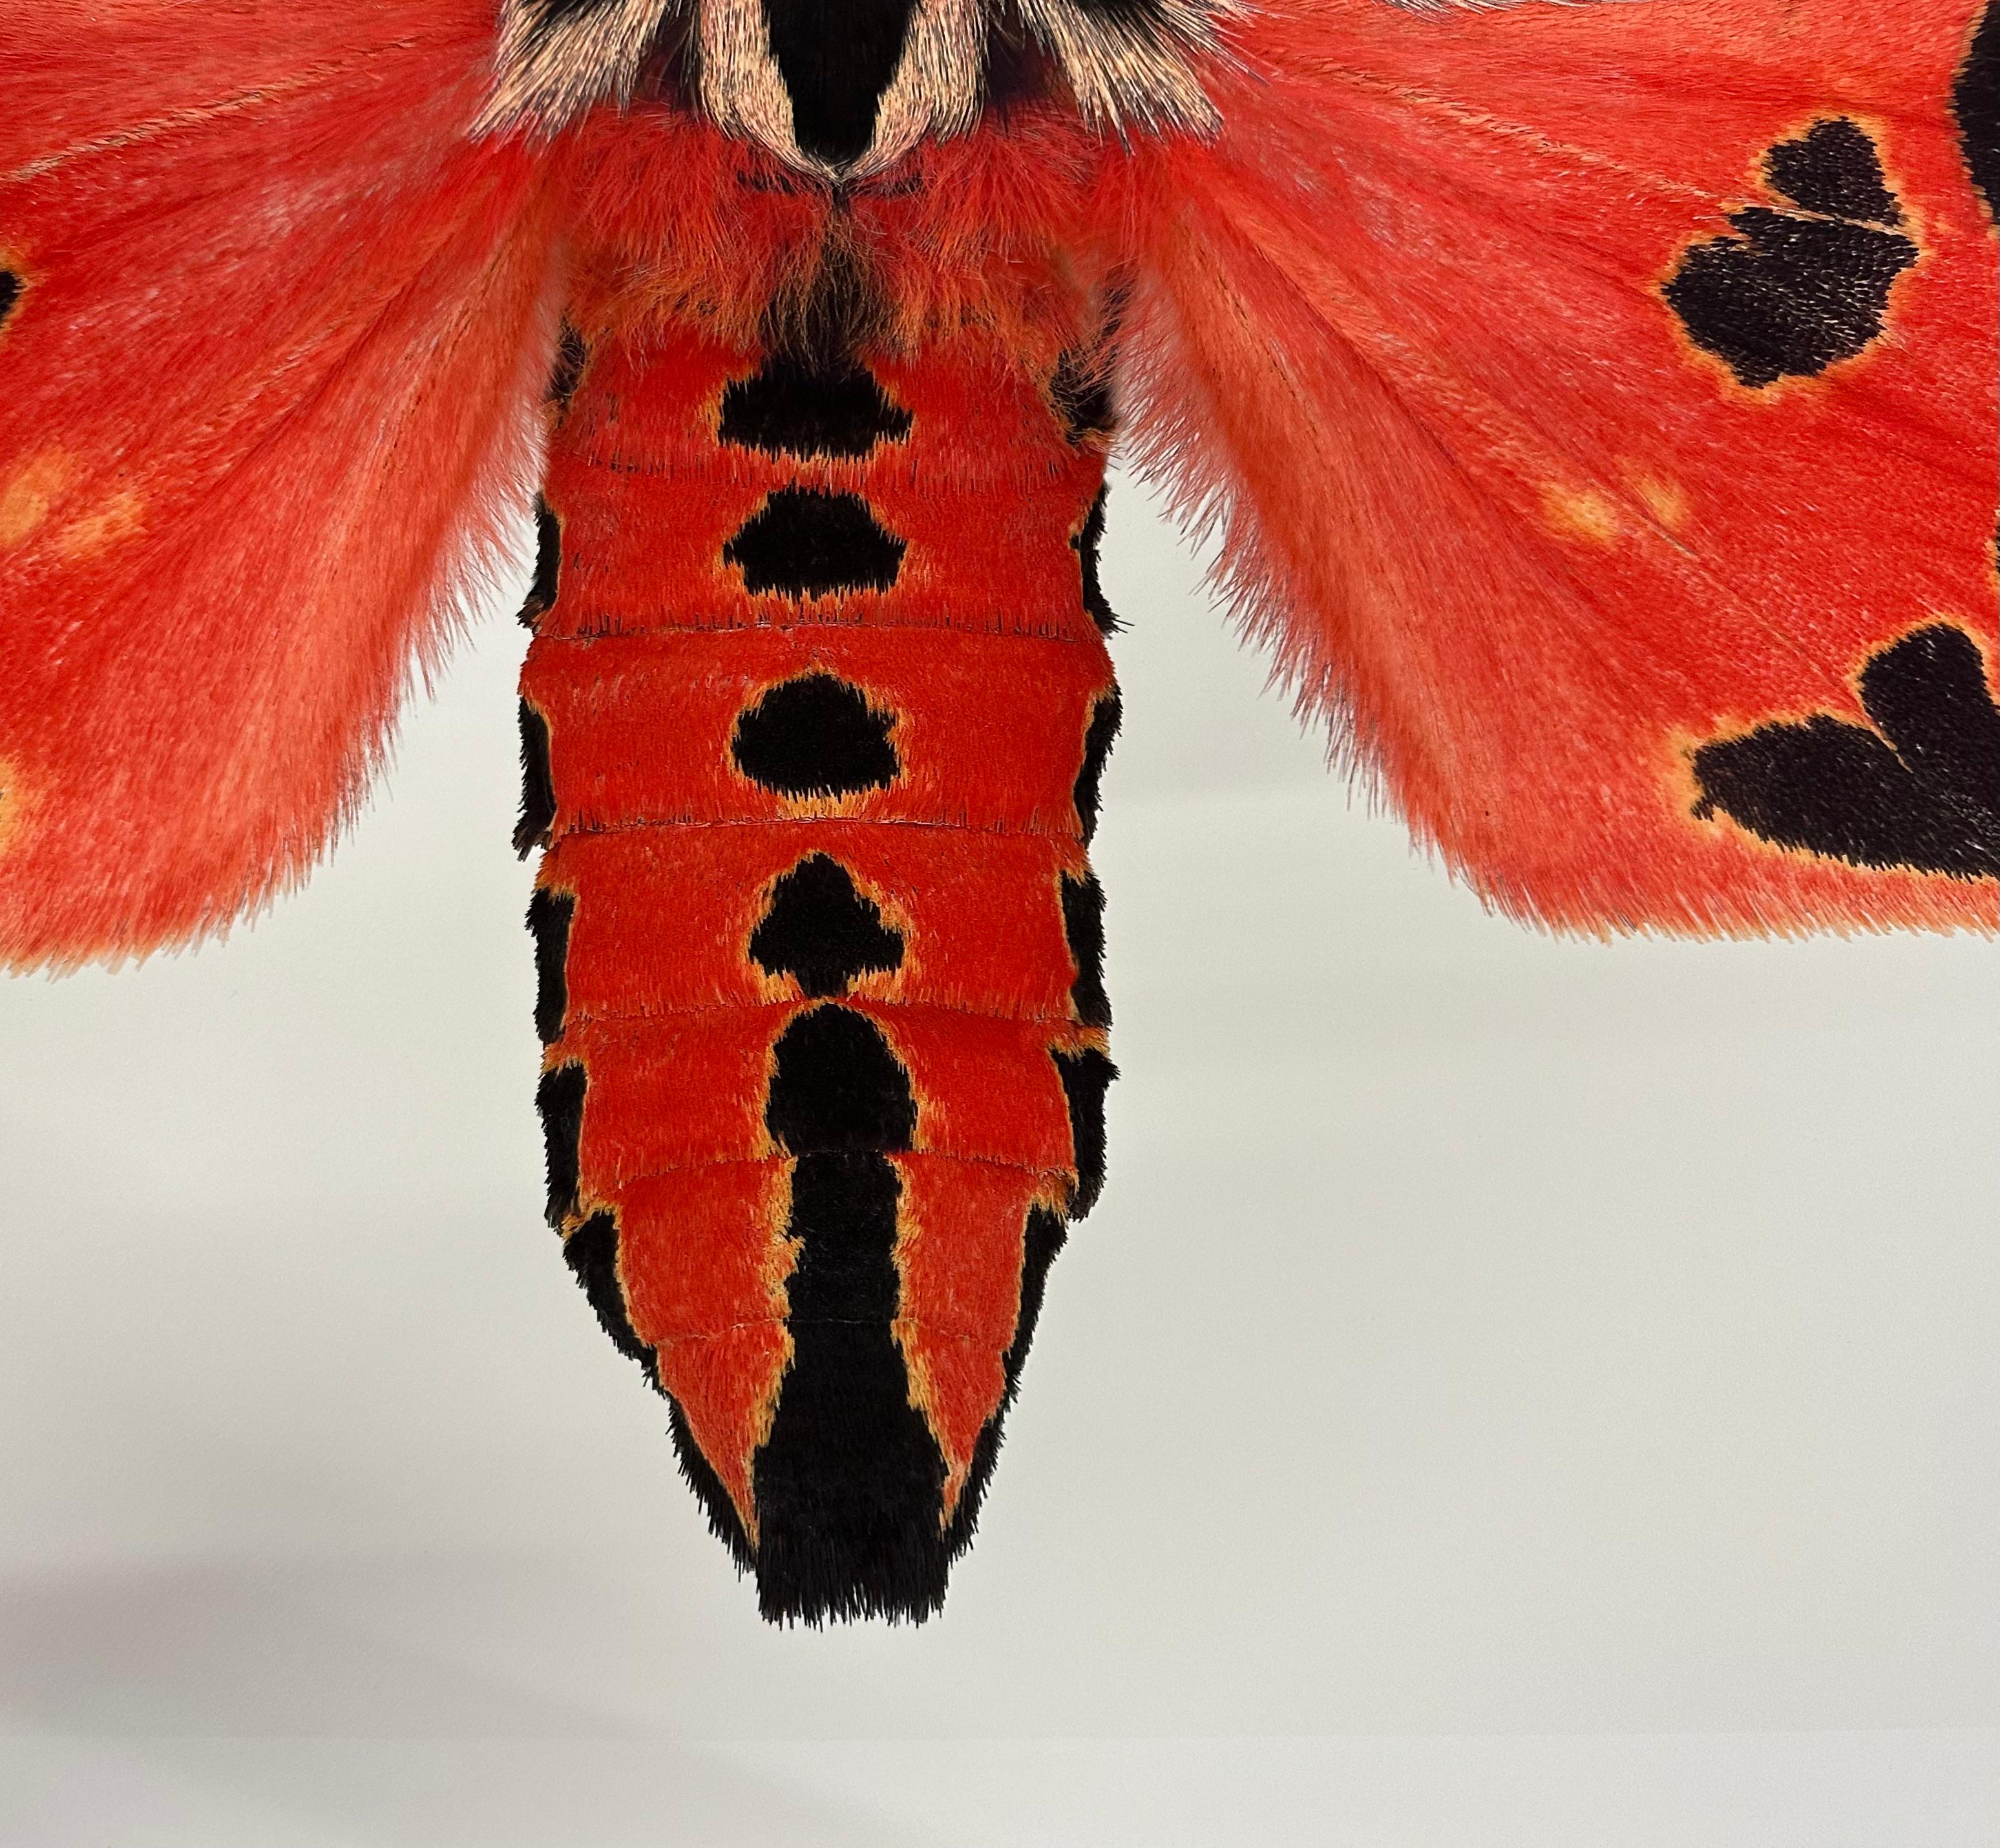 Grammia Virgo Female, Coral Red, Black Peach Moth Insect Wings Nature Photograph For Sale 4